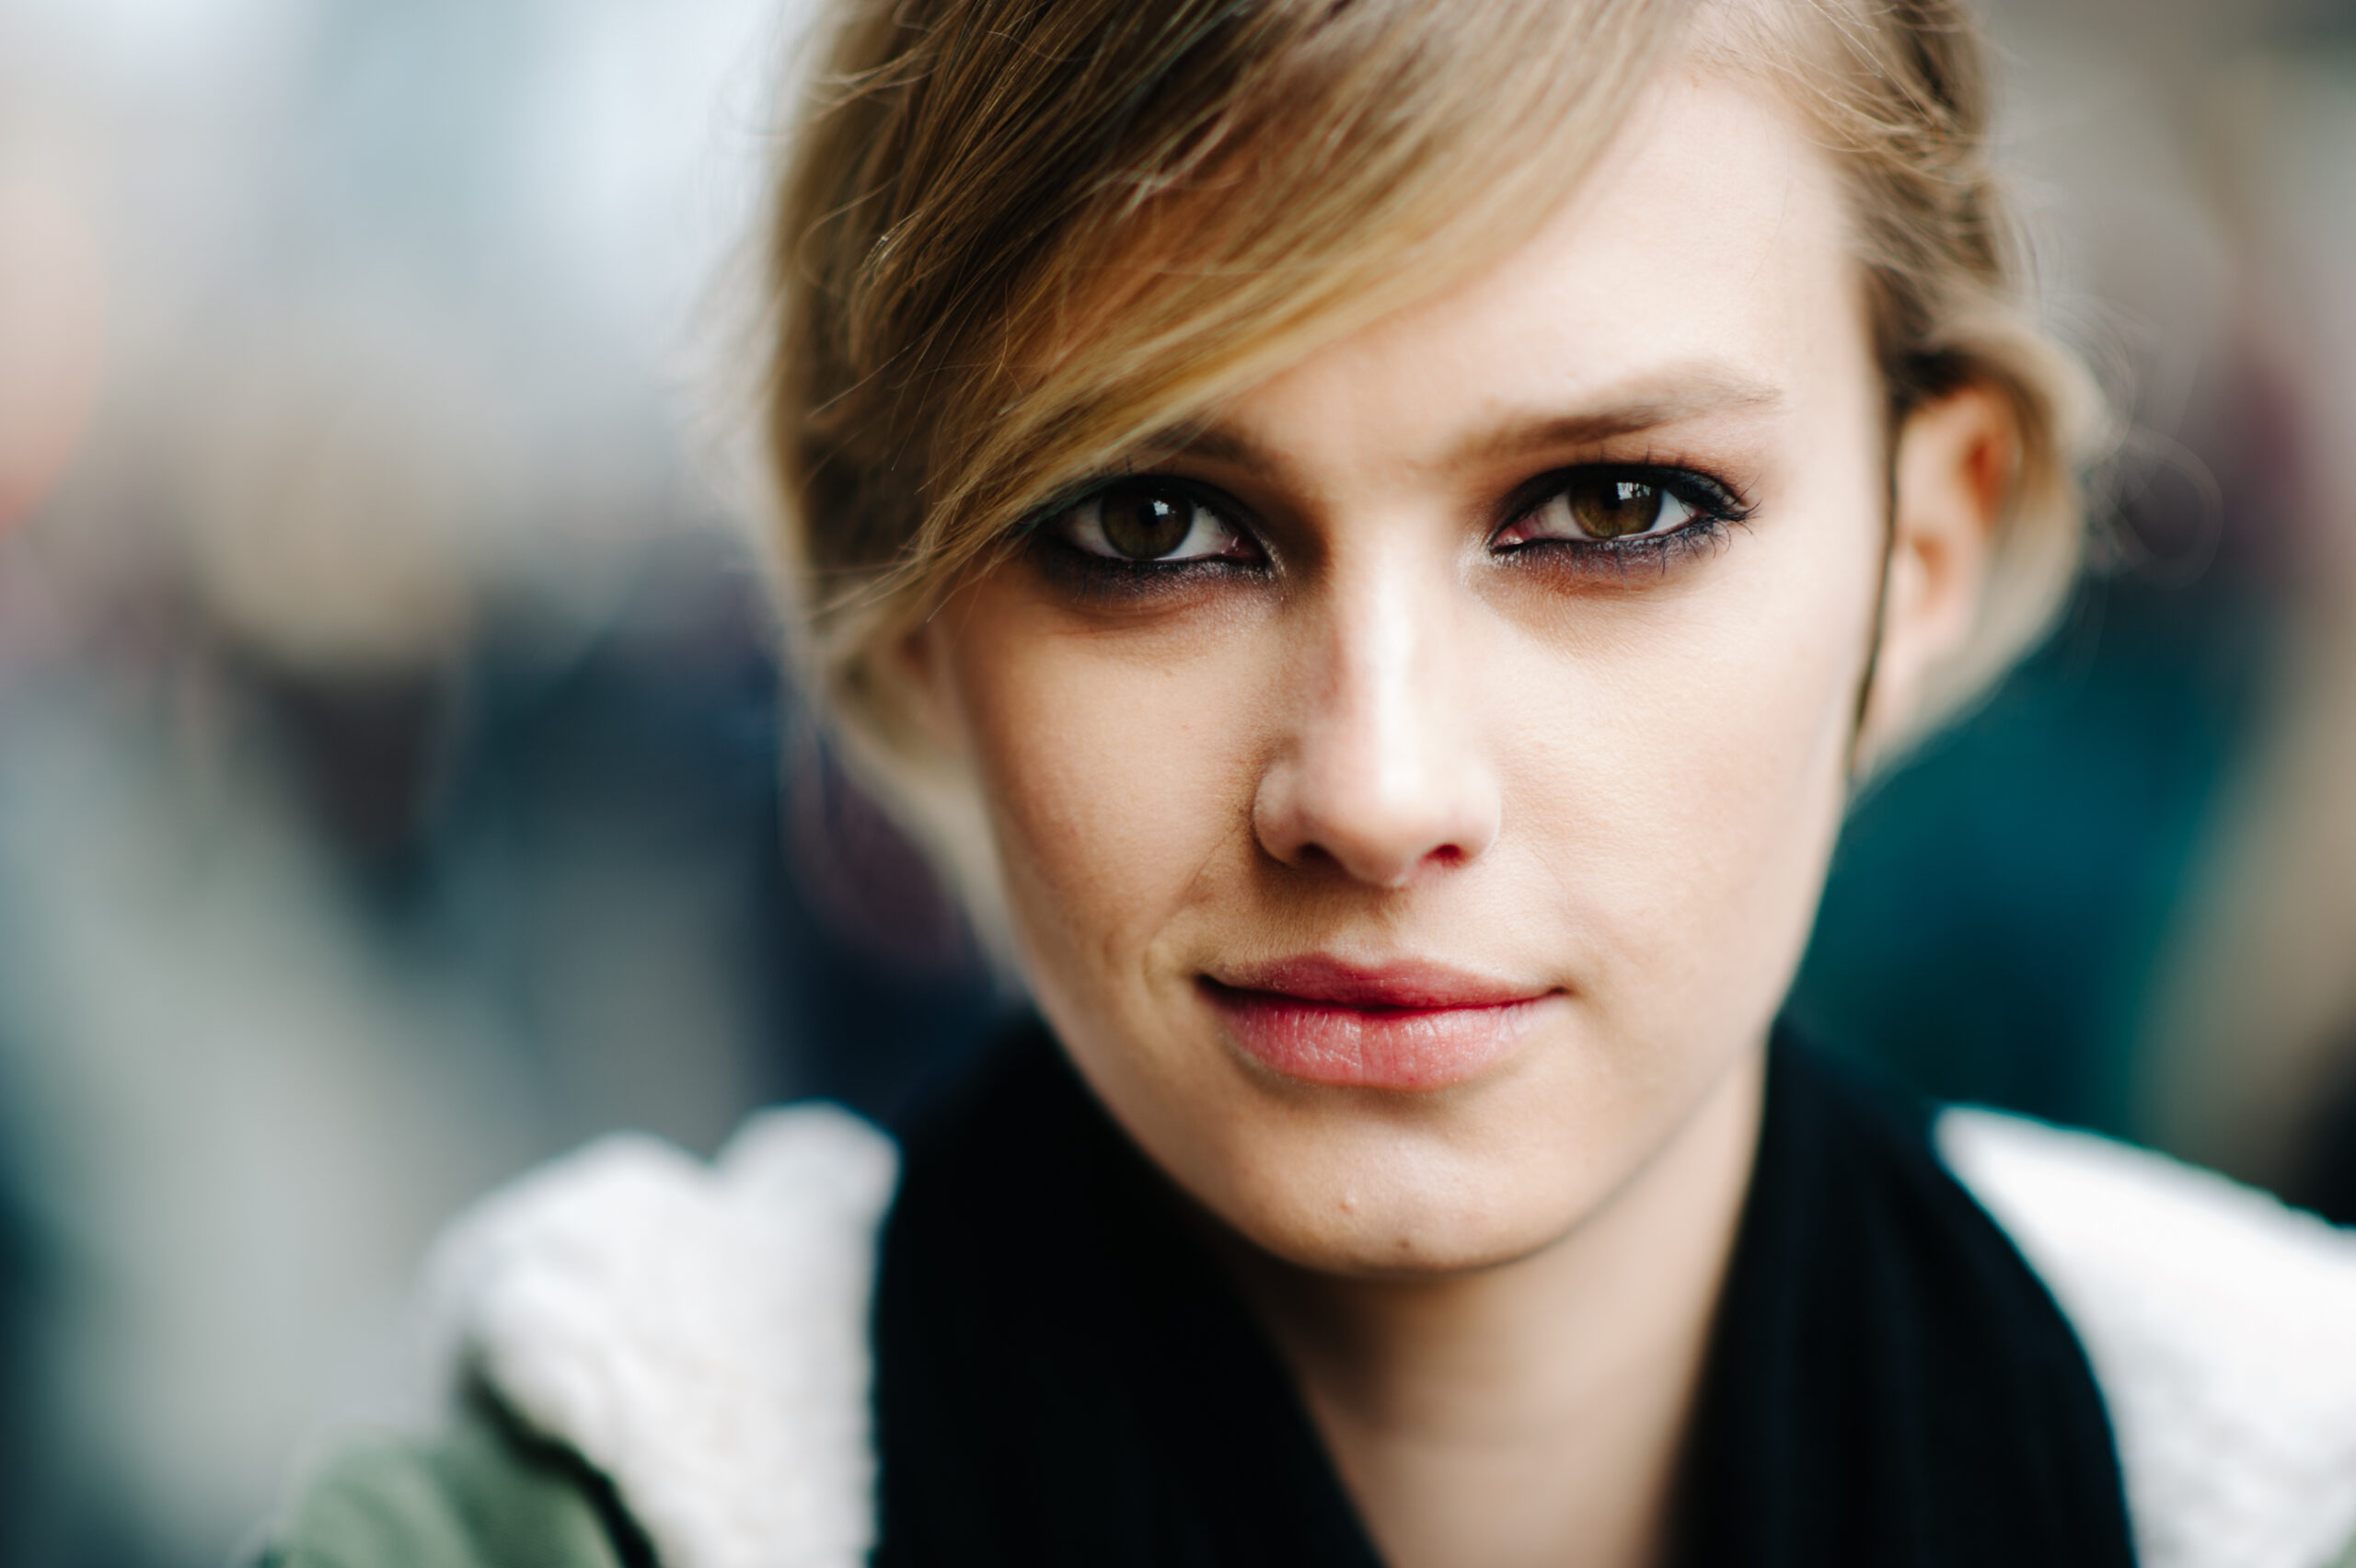 Sigrid Agren 1 Arena Pile Top 10 Most Promising Female Models In The World